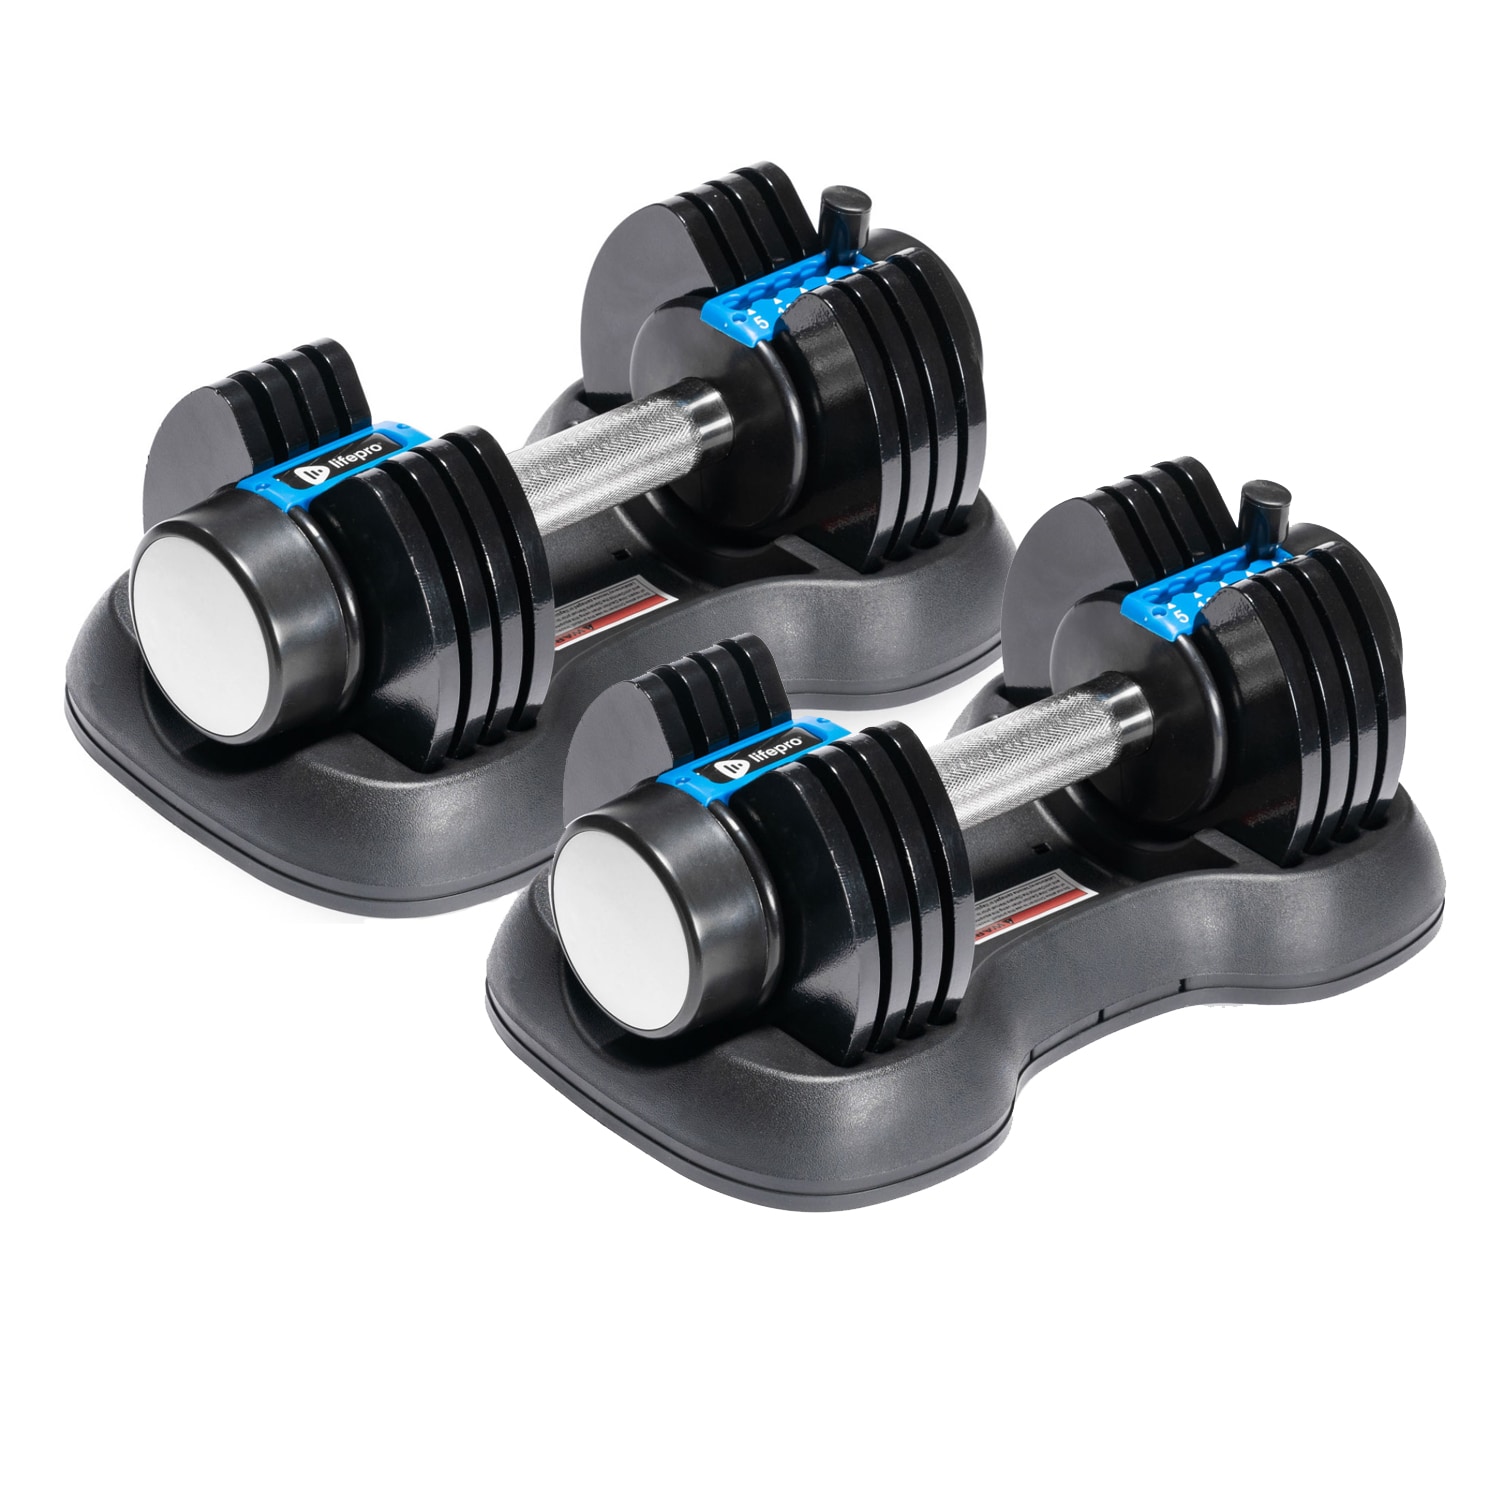 Details about   Adjustable Weight Dumbbell Set For Fitness Gym Home Barbell Plates Body Workout 